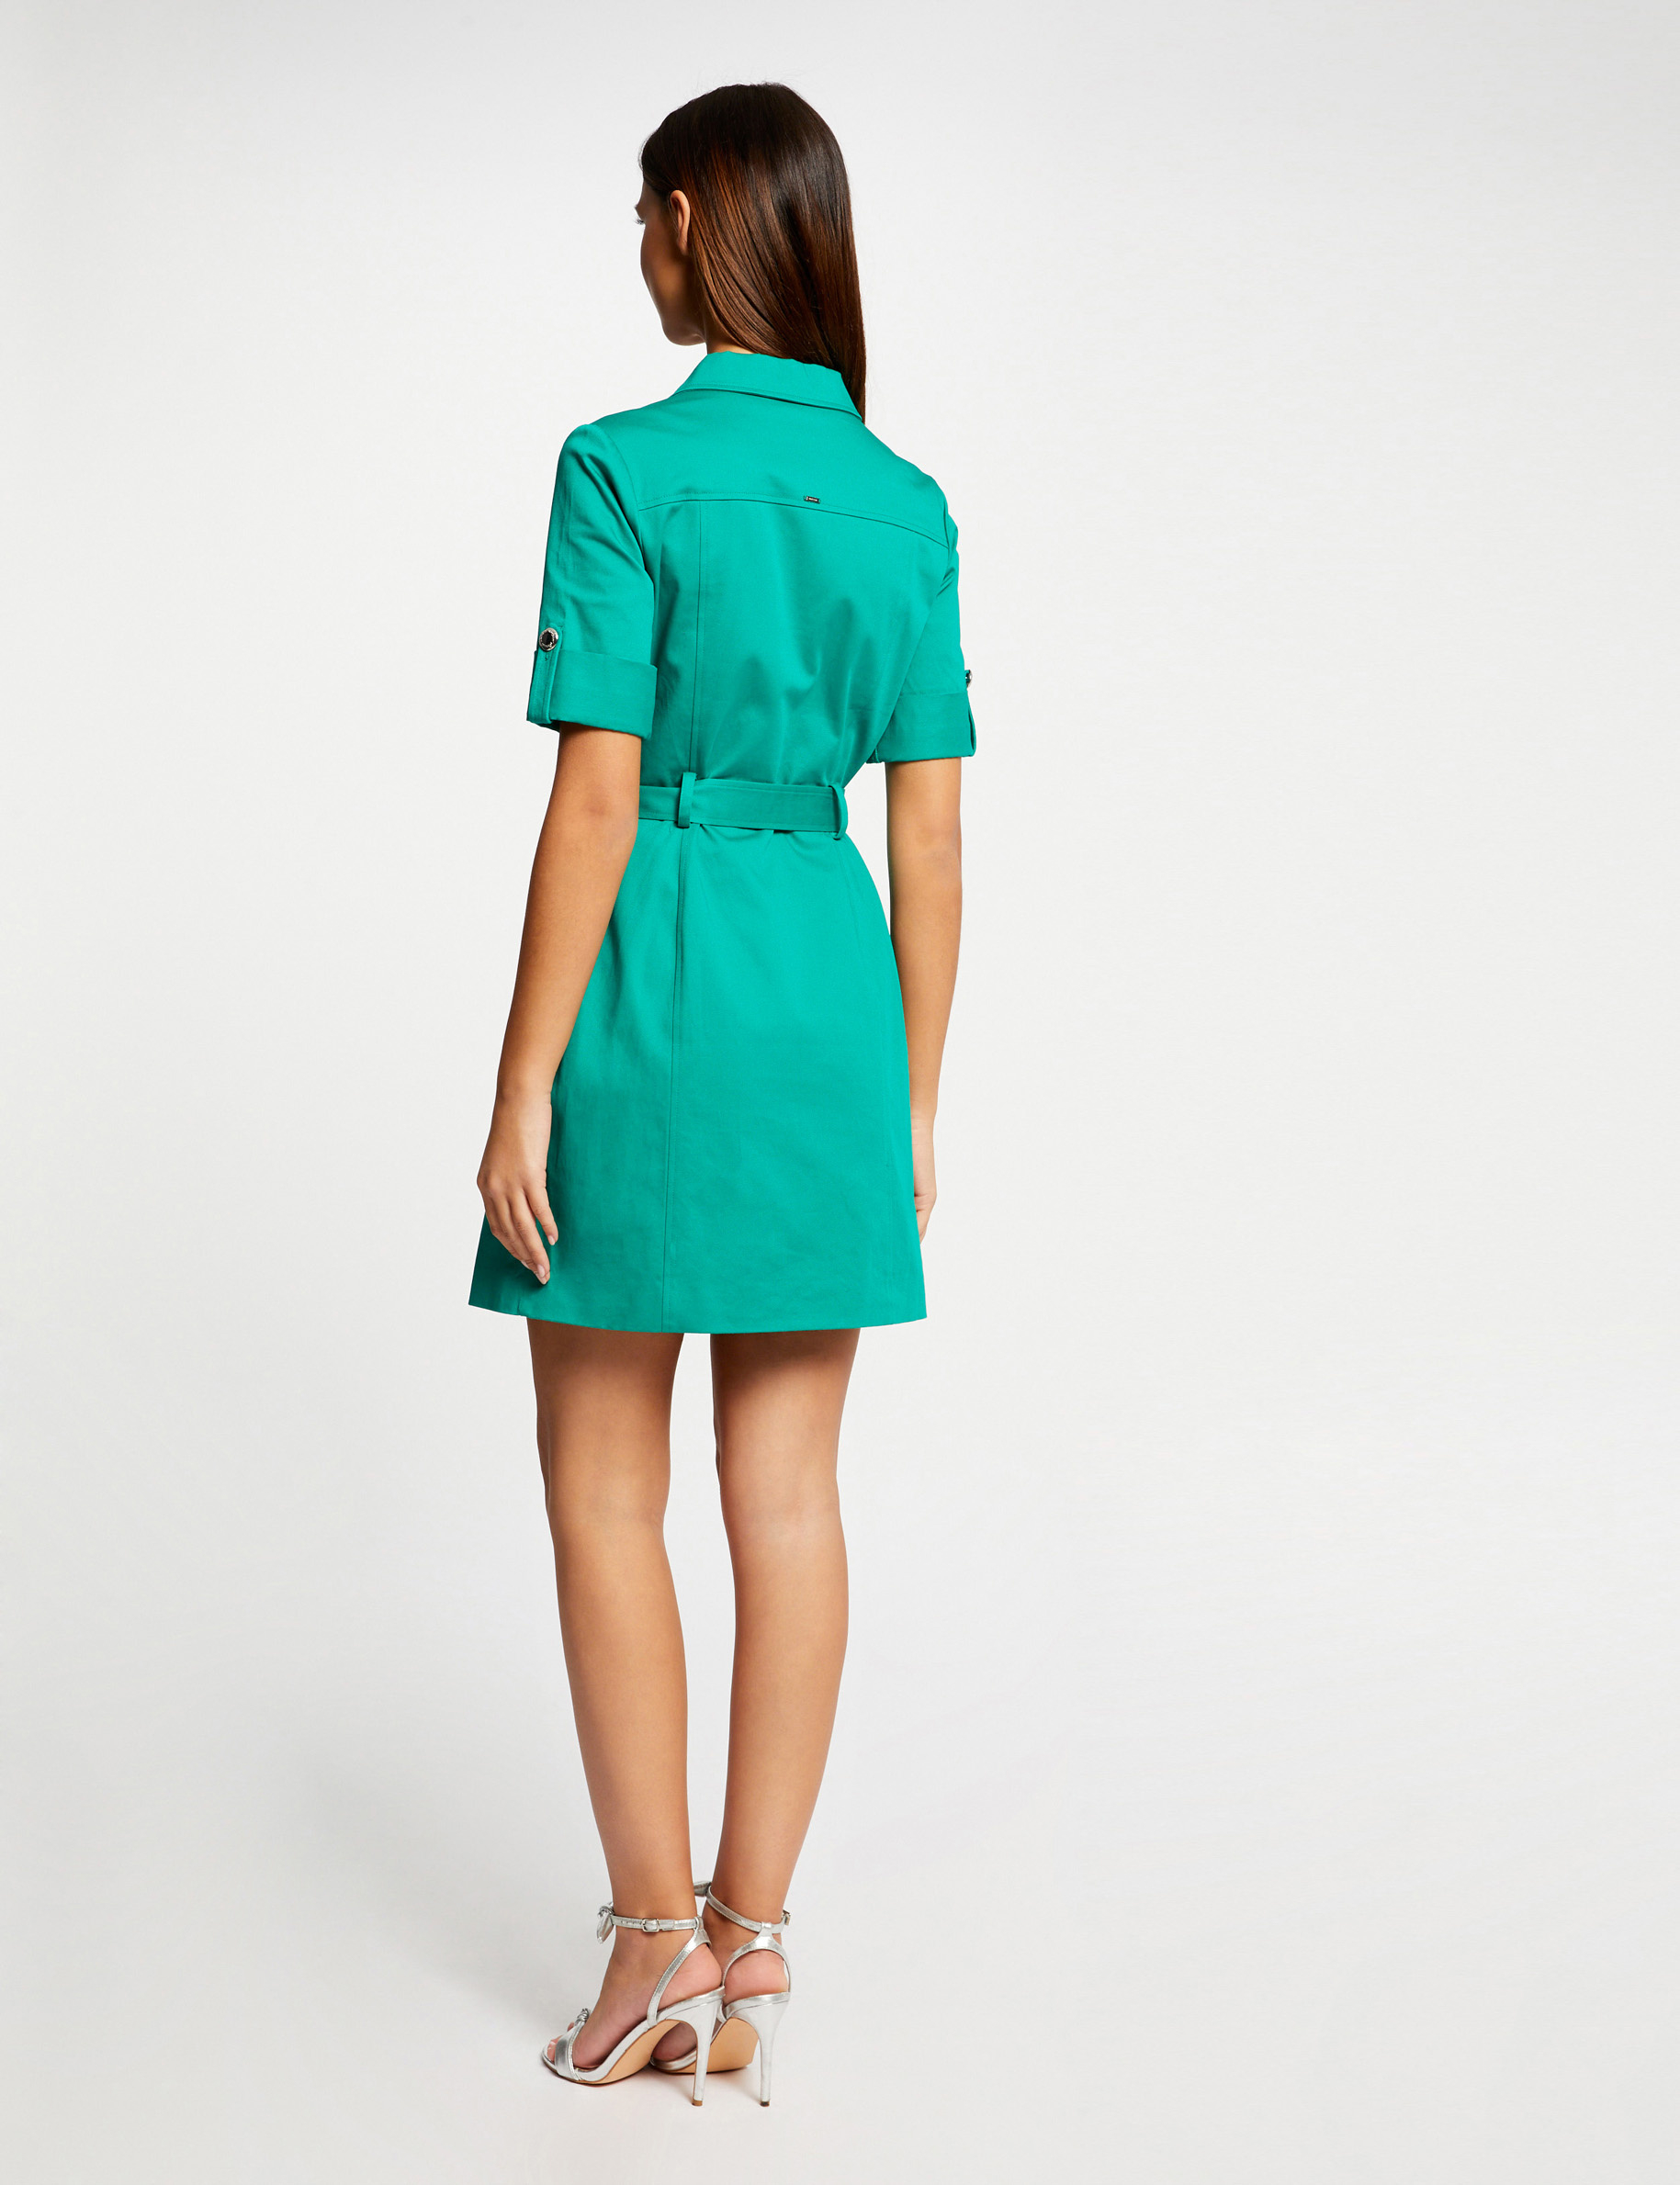 Belted straight dress with short sleeves mid-green ladies'